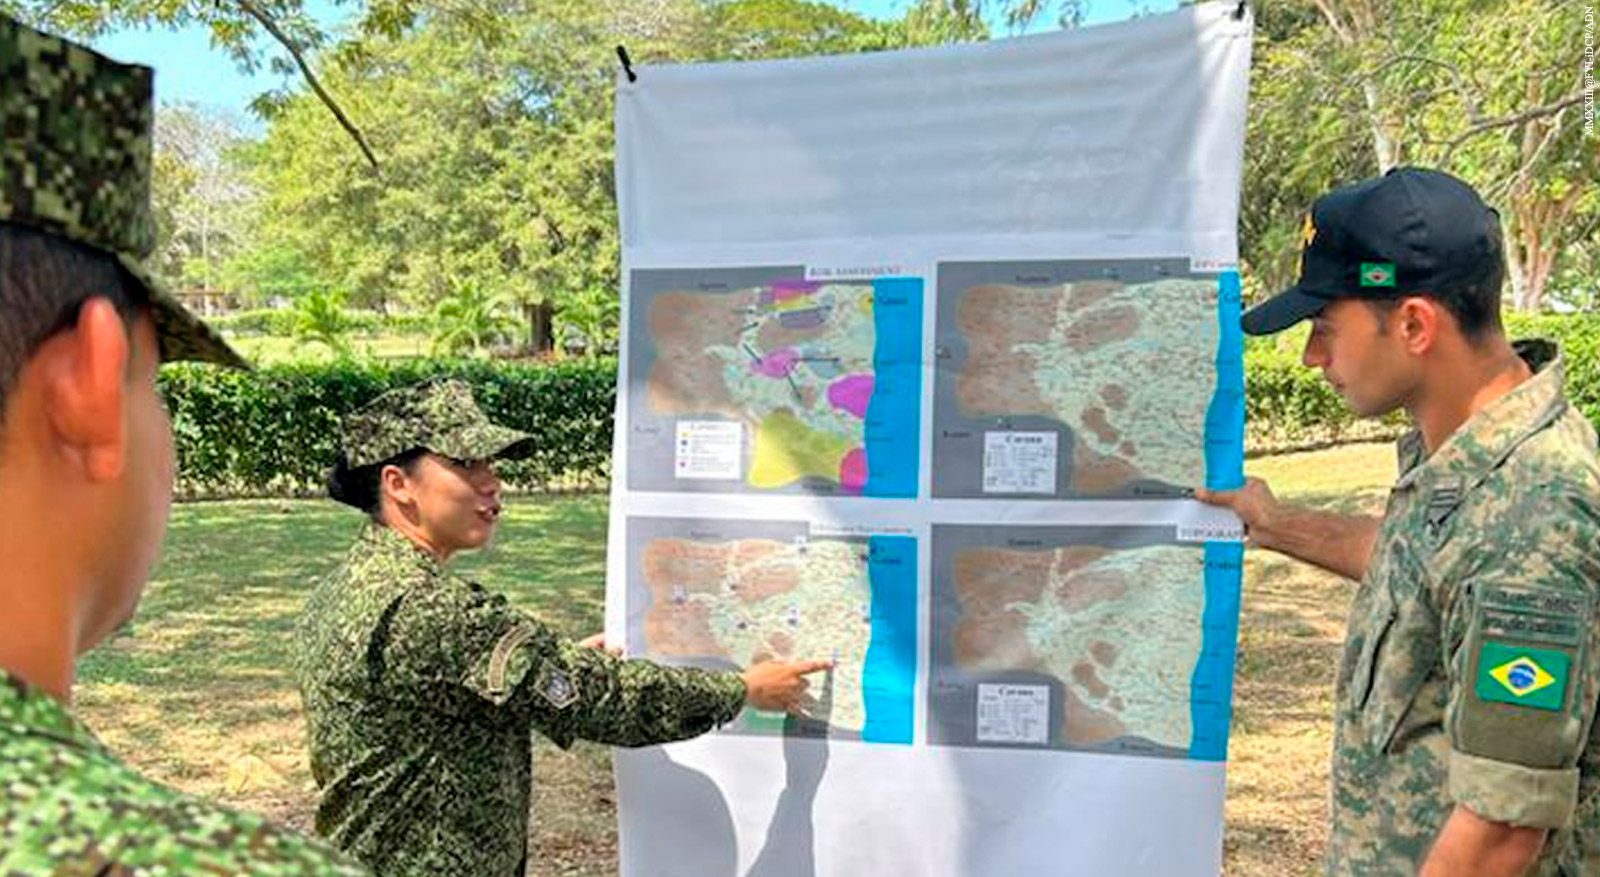 OpPazNav demonstrates its experience and pioneering spirit in the International Course for Riverine Military Units in Peace Operations, supporting CEPAZ in its certification before the UN - Image: Marinha do Brasil